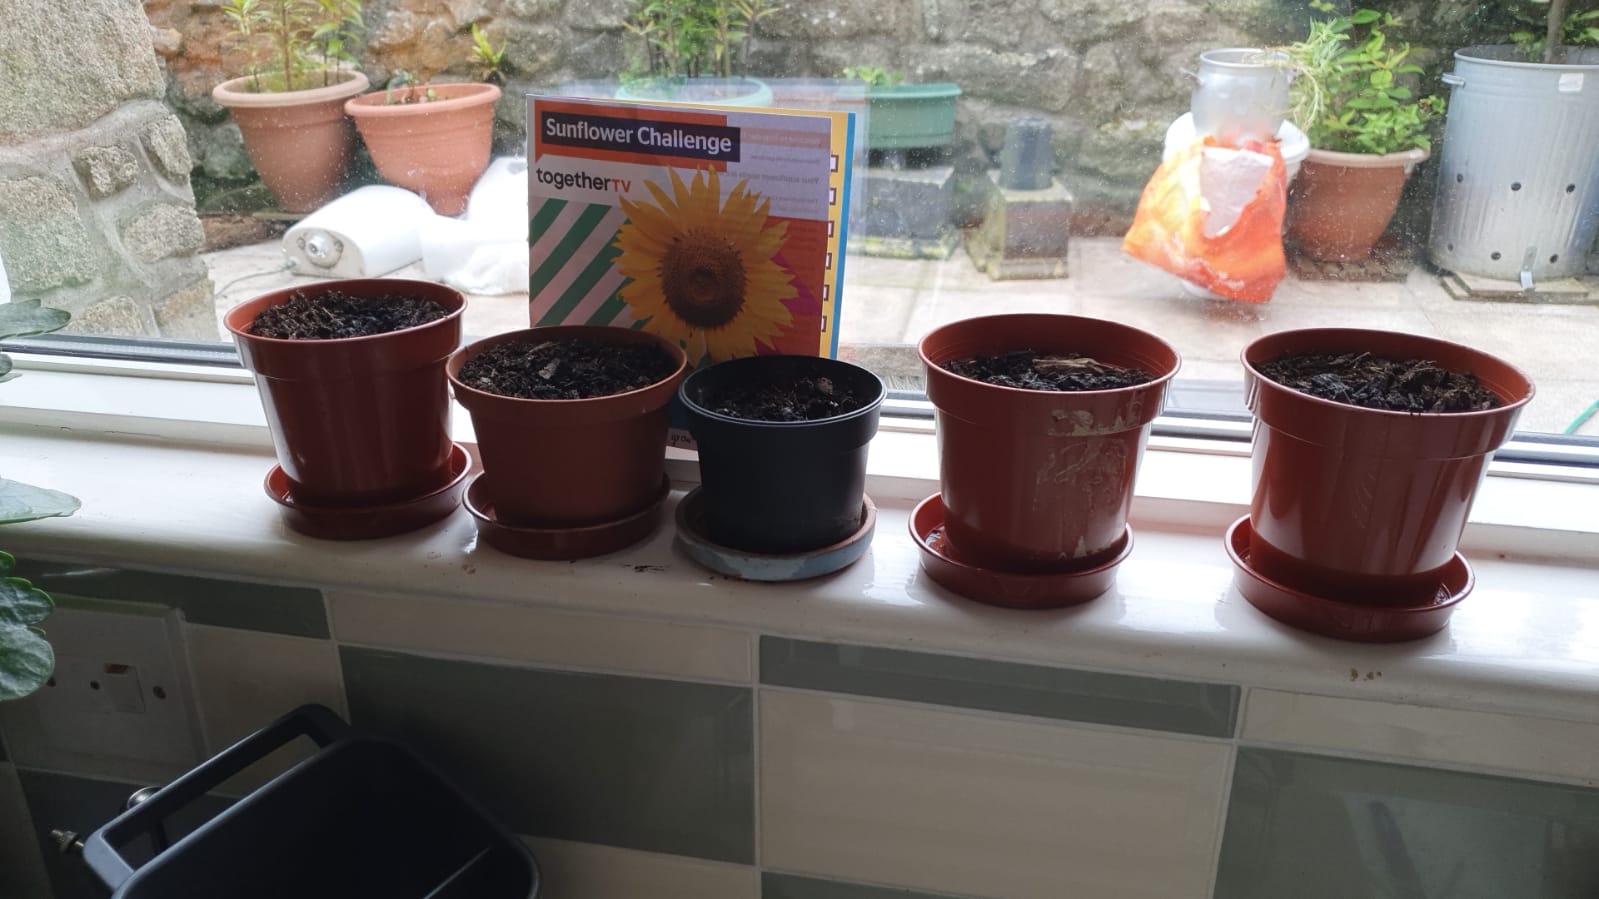 Peter D - My 5 sunflower seeds sown today